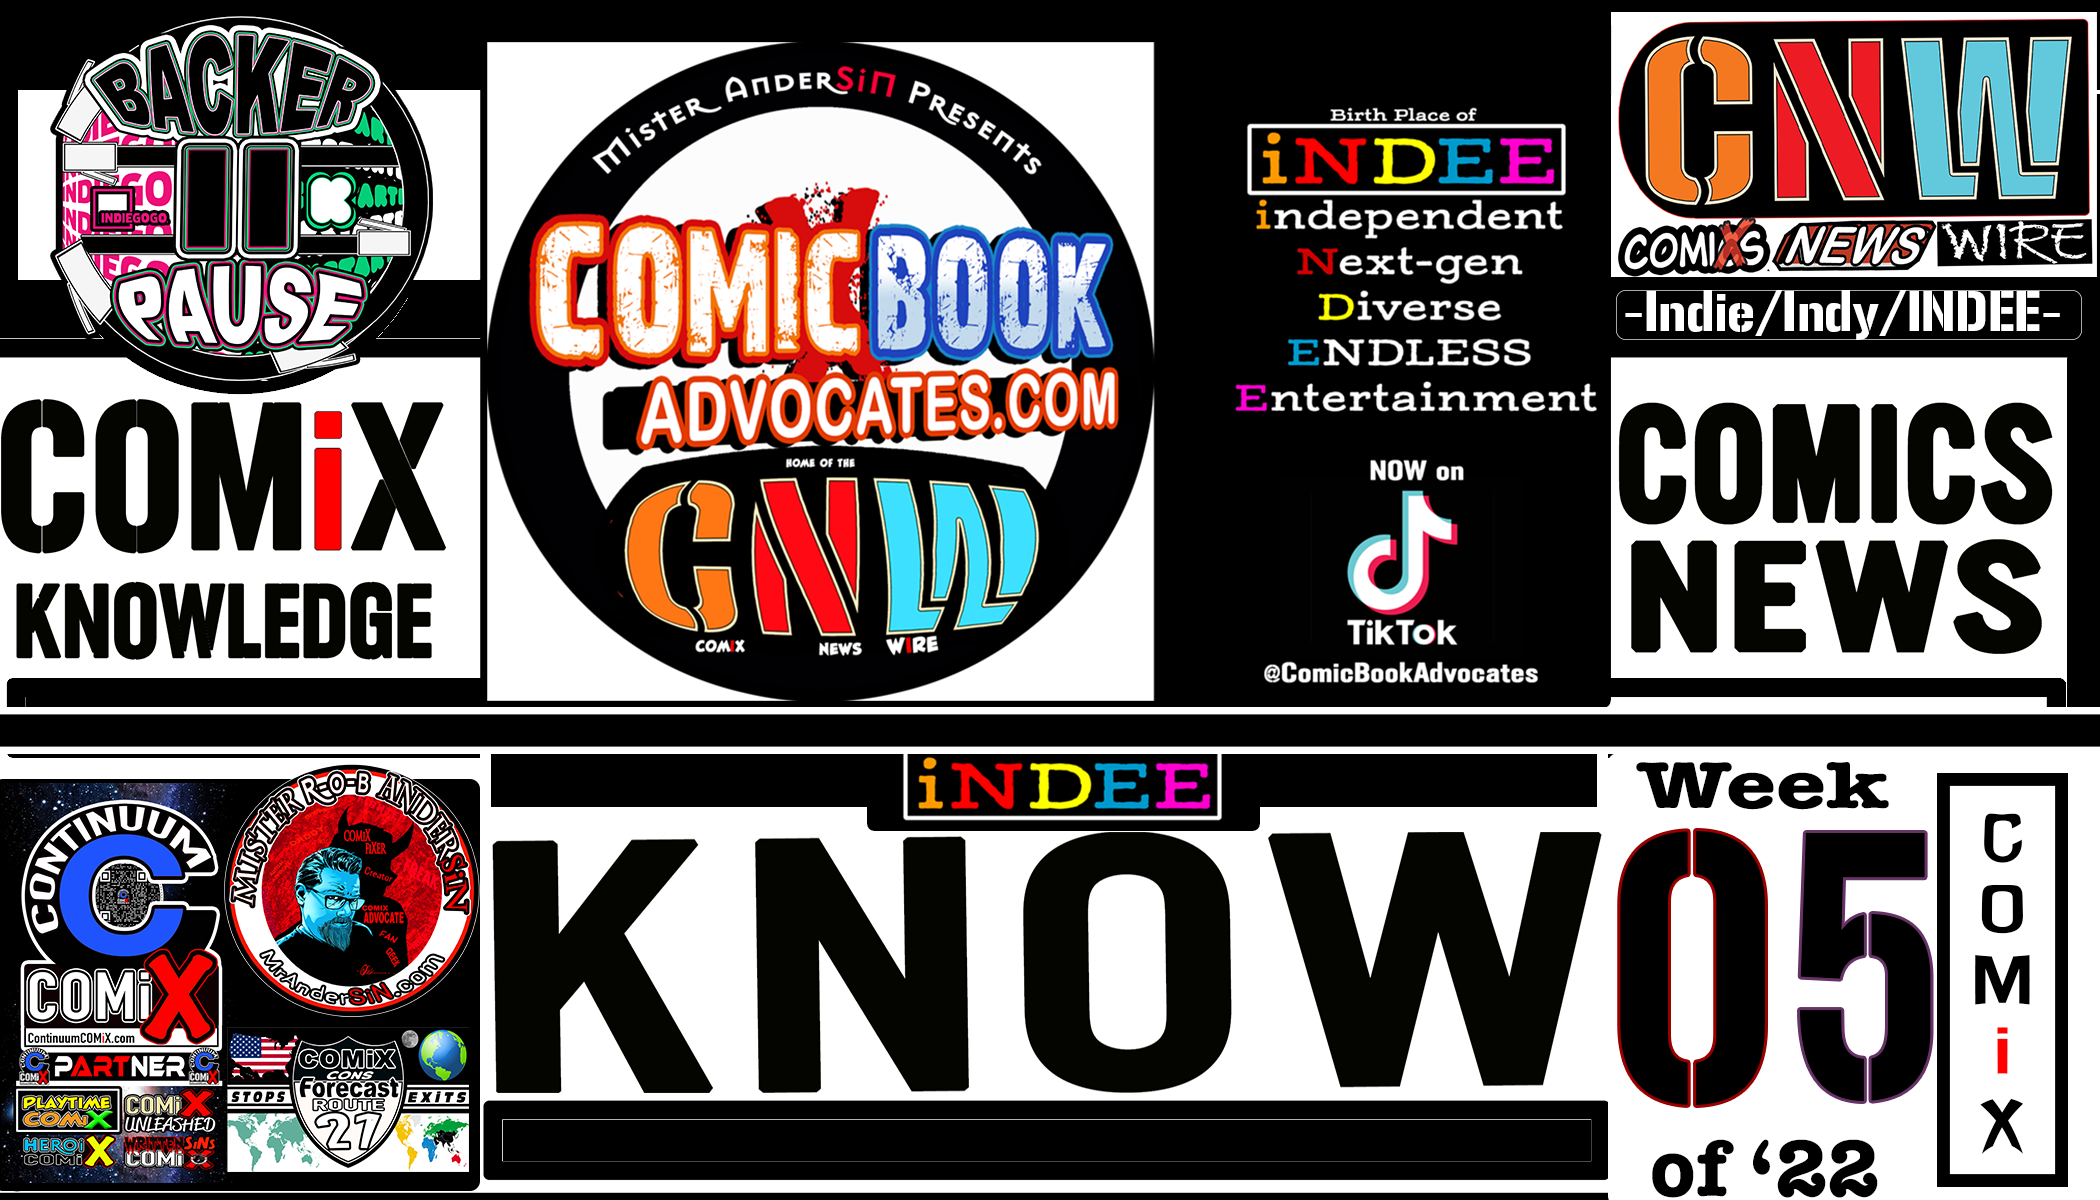 The INDEE NEWS WiRE-Week  5 of 2022 -THE COMiX NEWS WiRE.